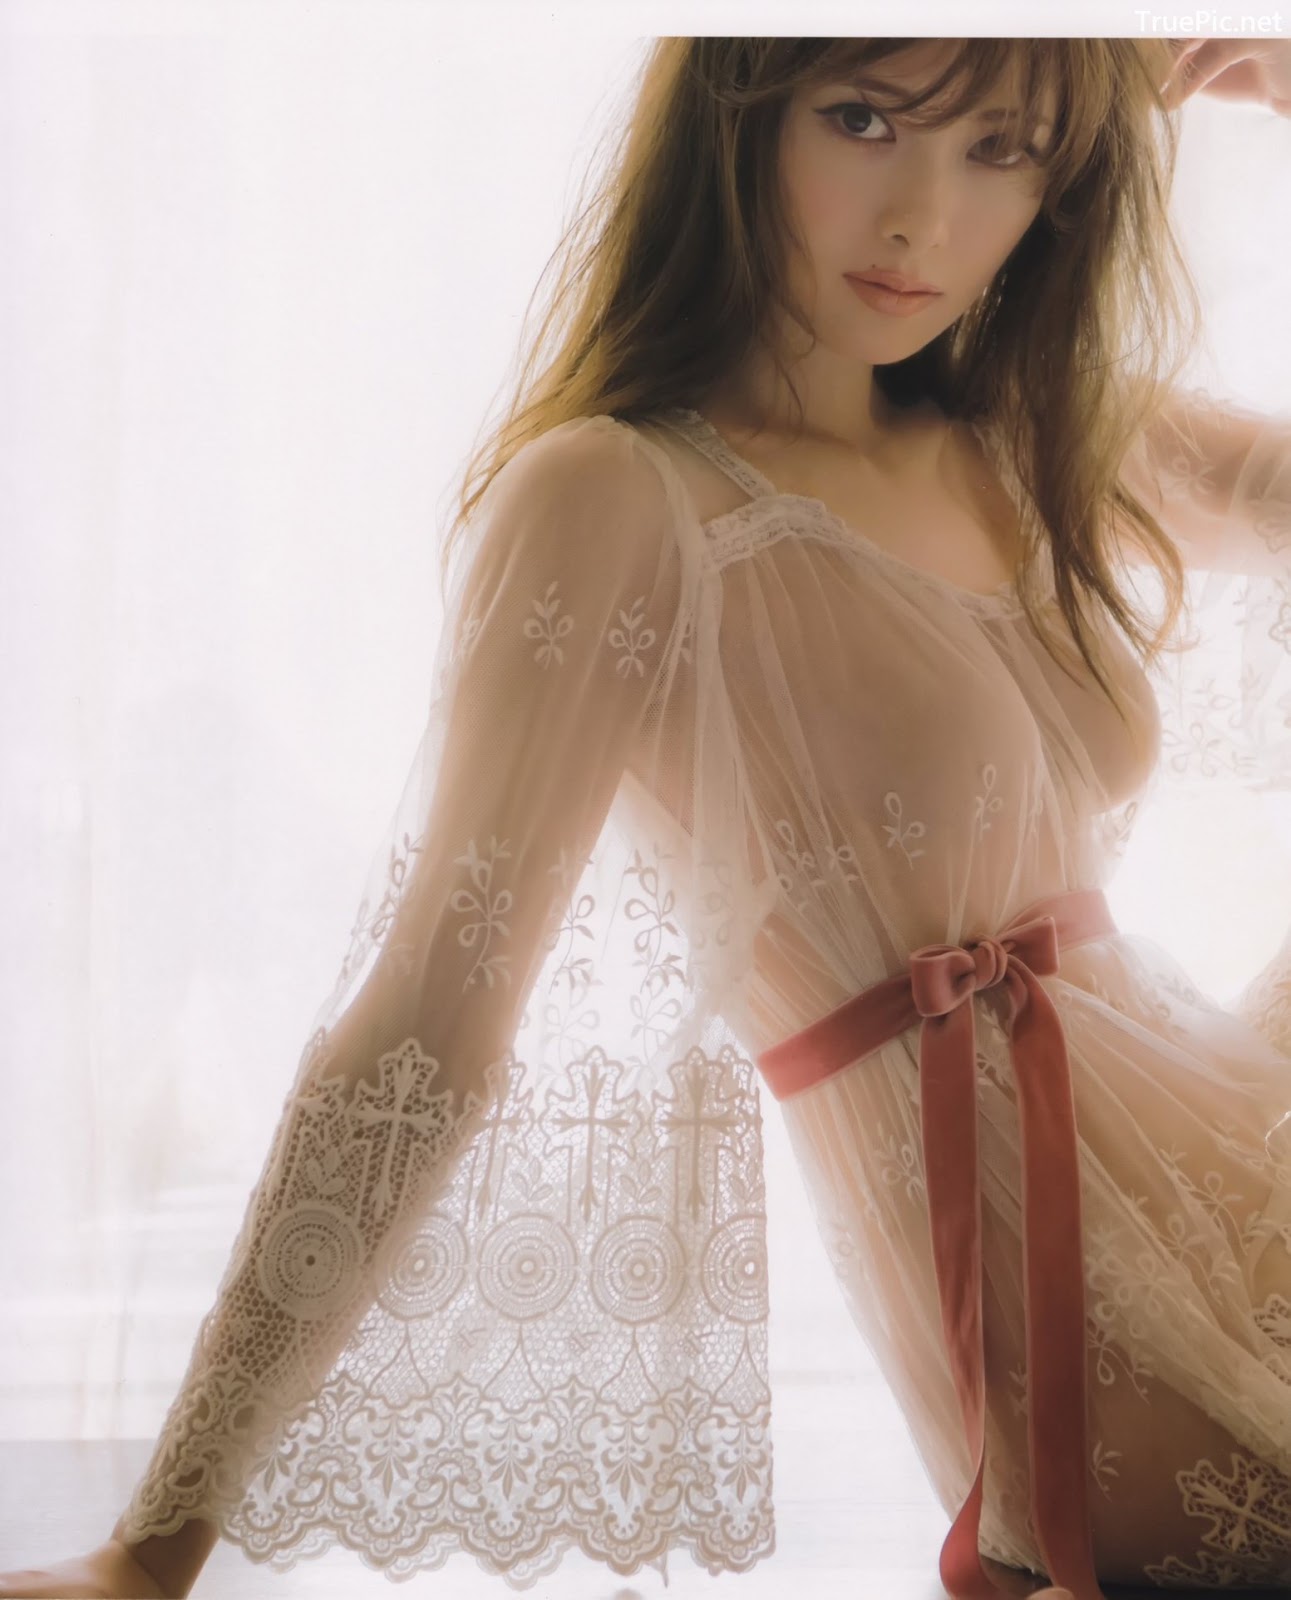 Image Japanese Singer And Model - Mai Shiraishi - Charming Beauty Of Angel - TruePic.net - Picture-15